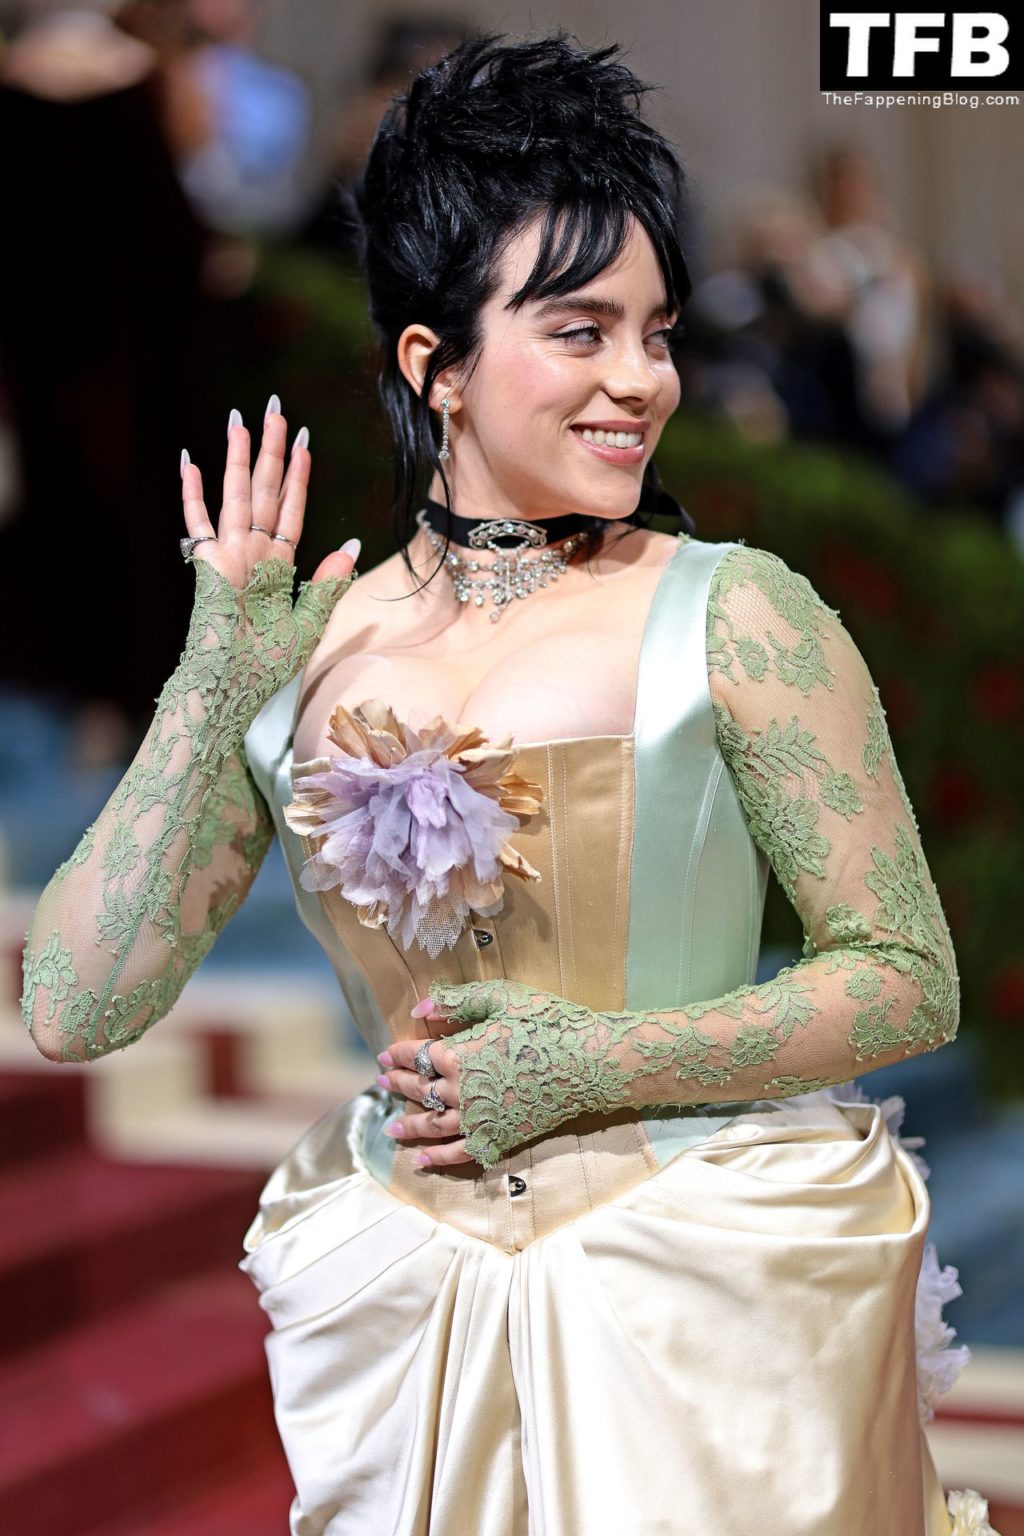 Billie Eilish Sexy The Fappening Blog 41 1024x1536 - Billie Eilish Showcases Nice Cleavage at The 2022 Met Gala in NYC (155 Photos)